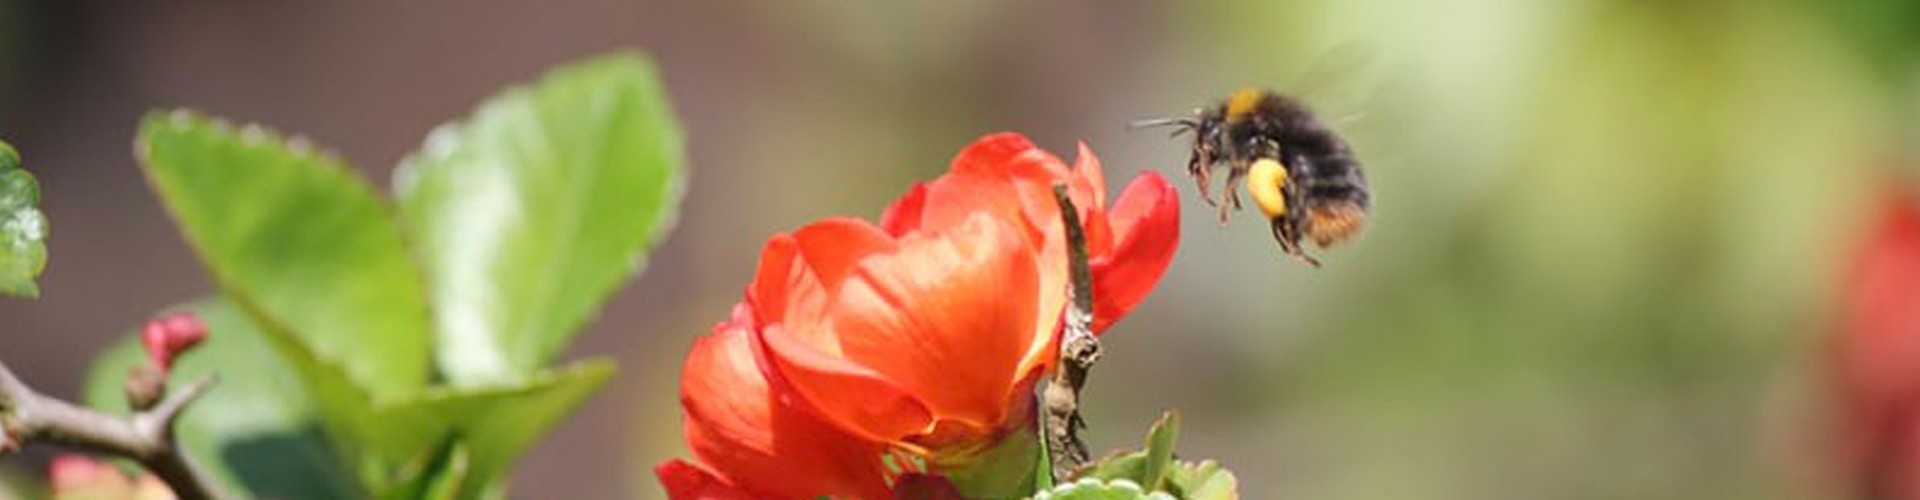 bee visiting a red flower